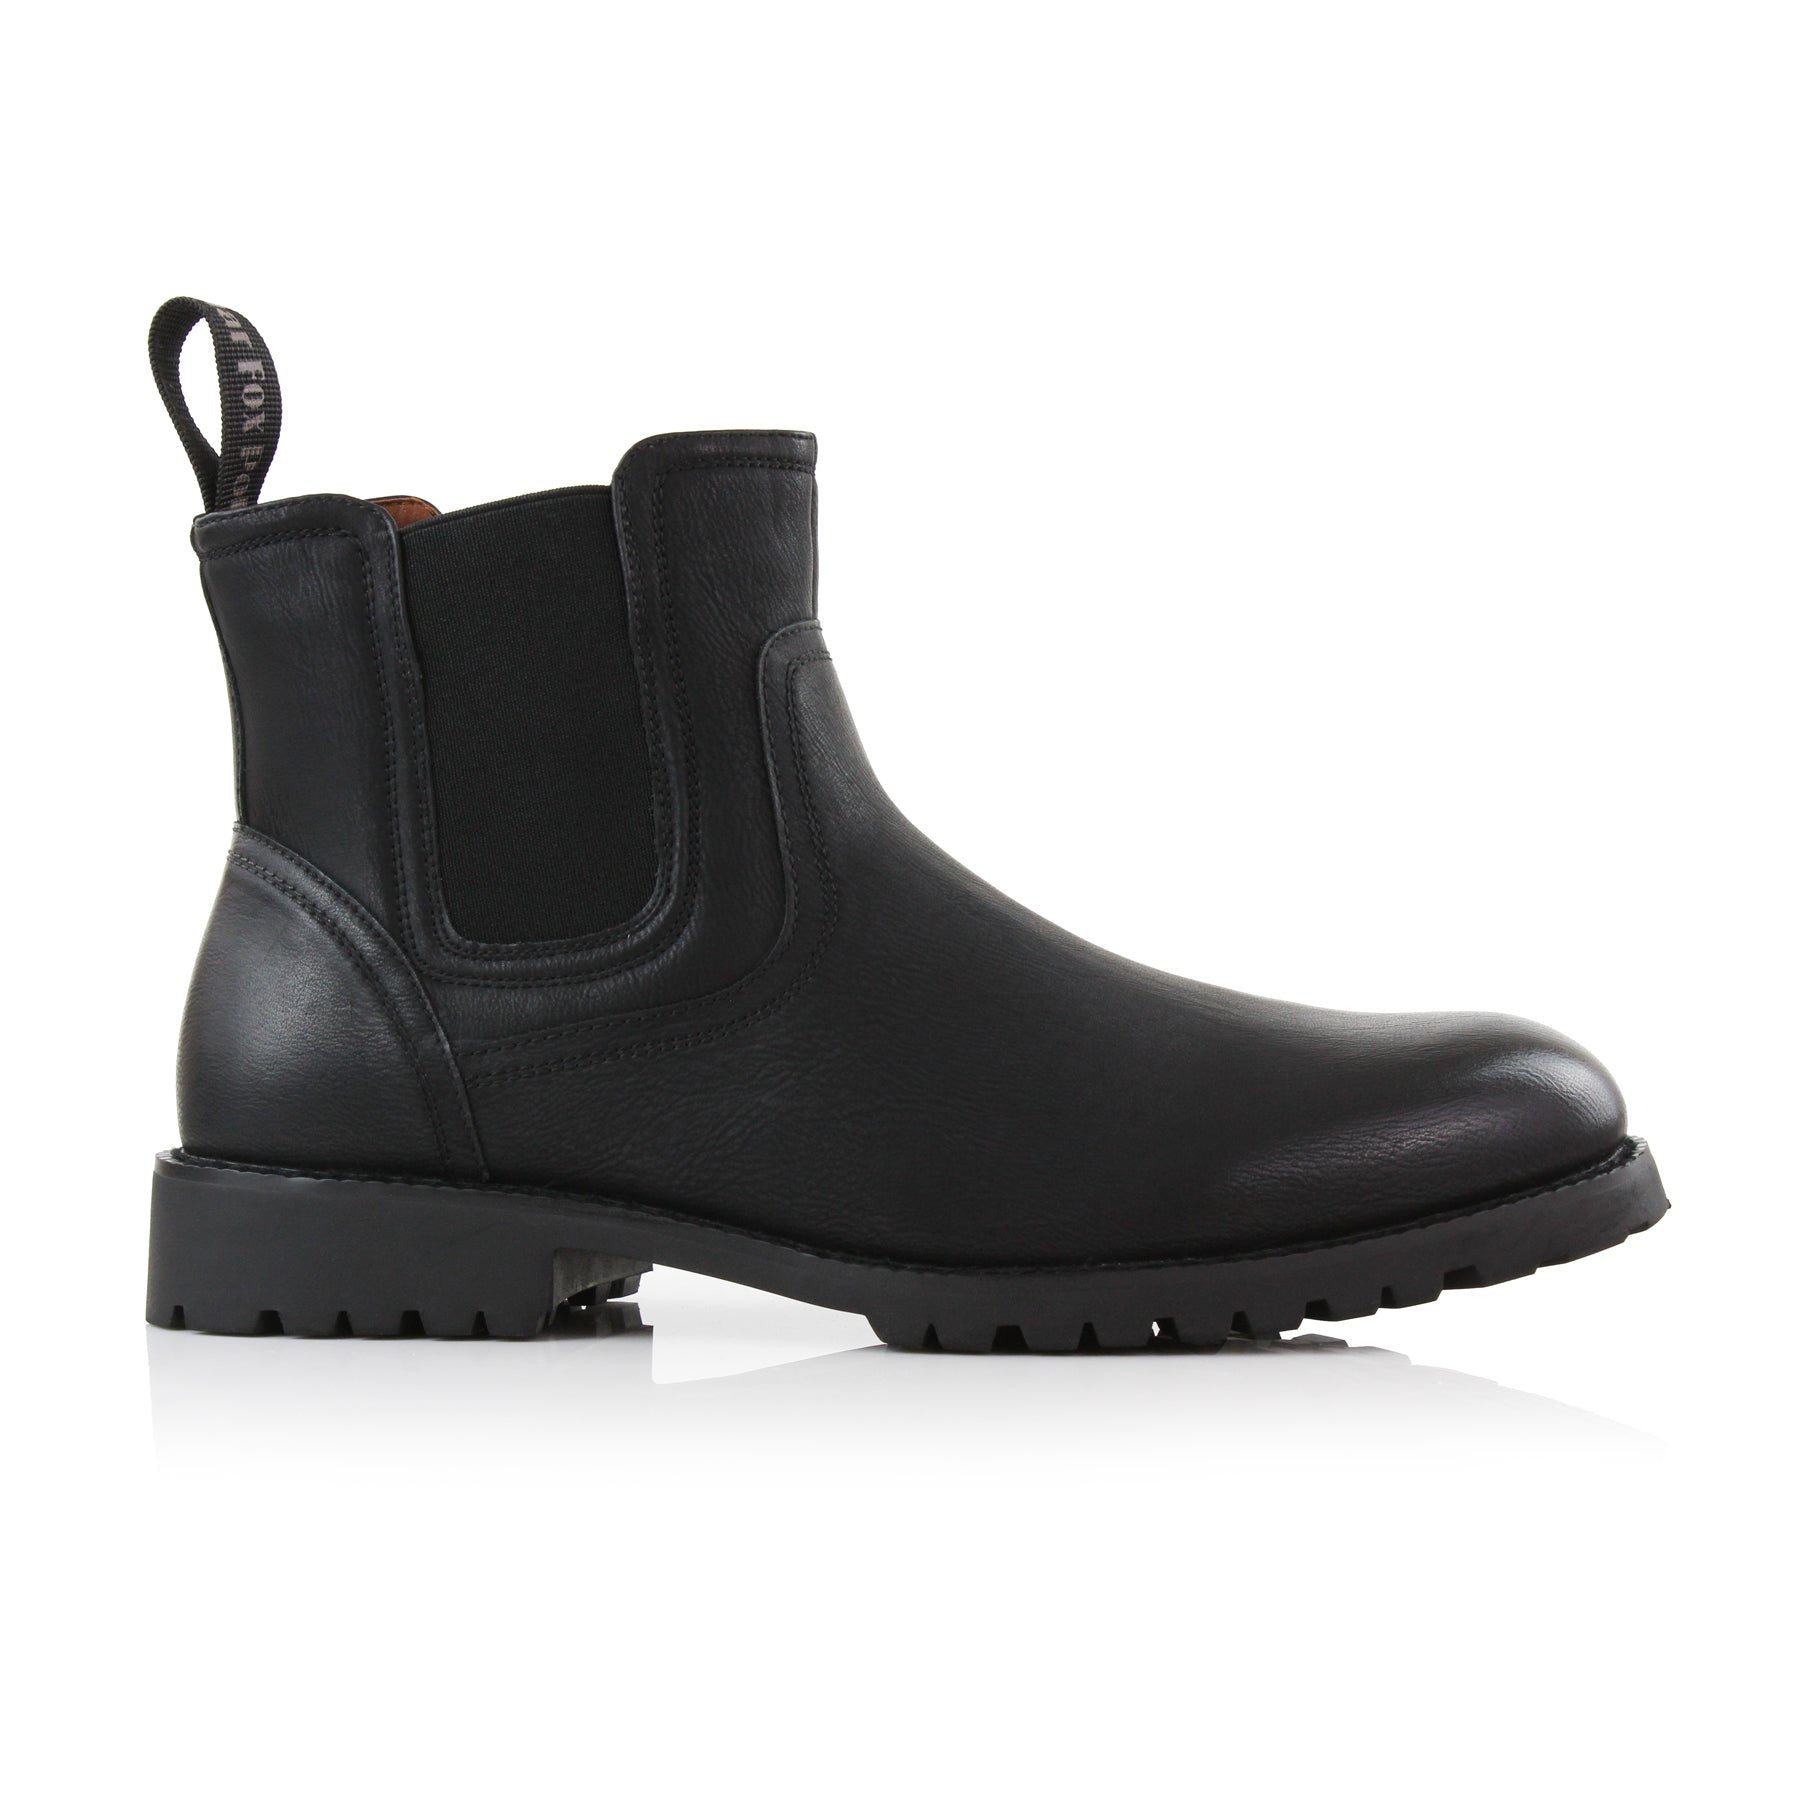 Western Style Chelsea Boots | Duncan by Polar Fox | Conal Footwear | Outer Side Angle View